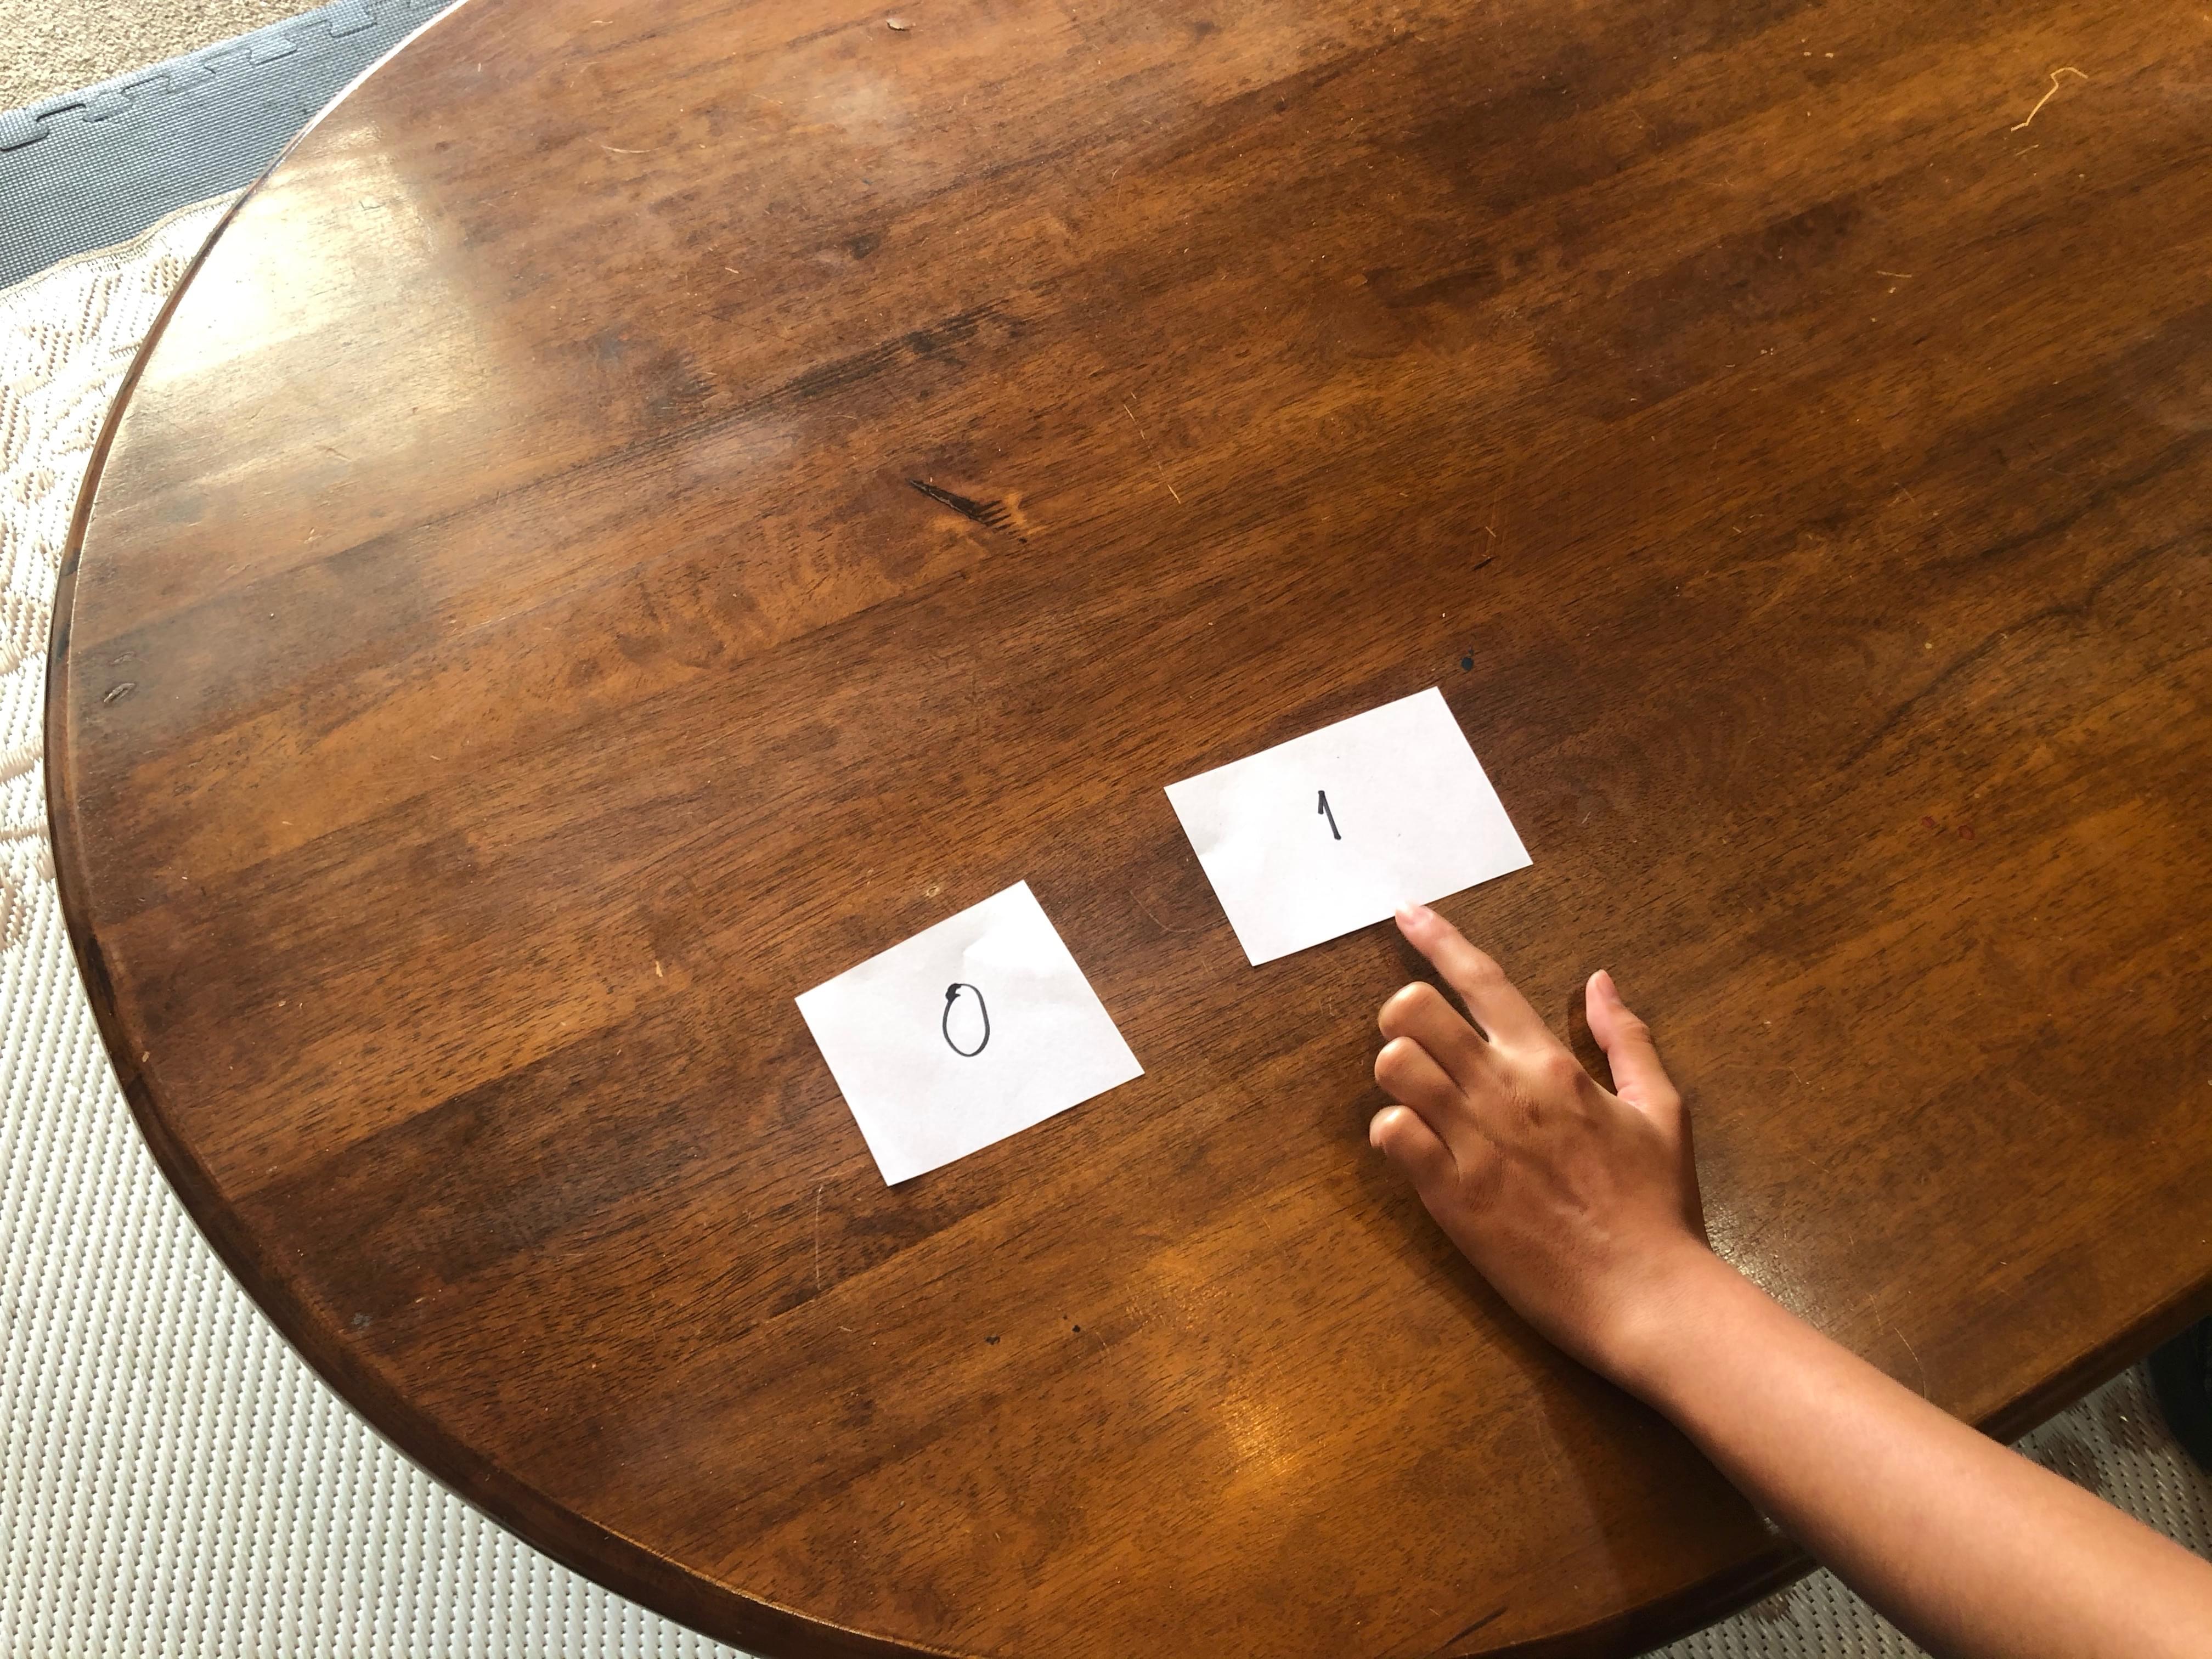 Child pointing to the card with the number 1 on it.